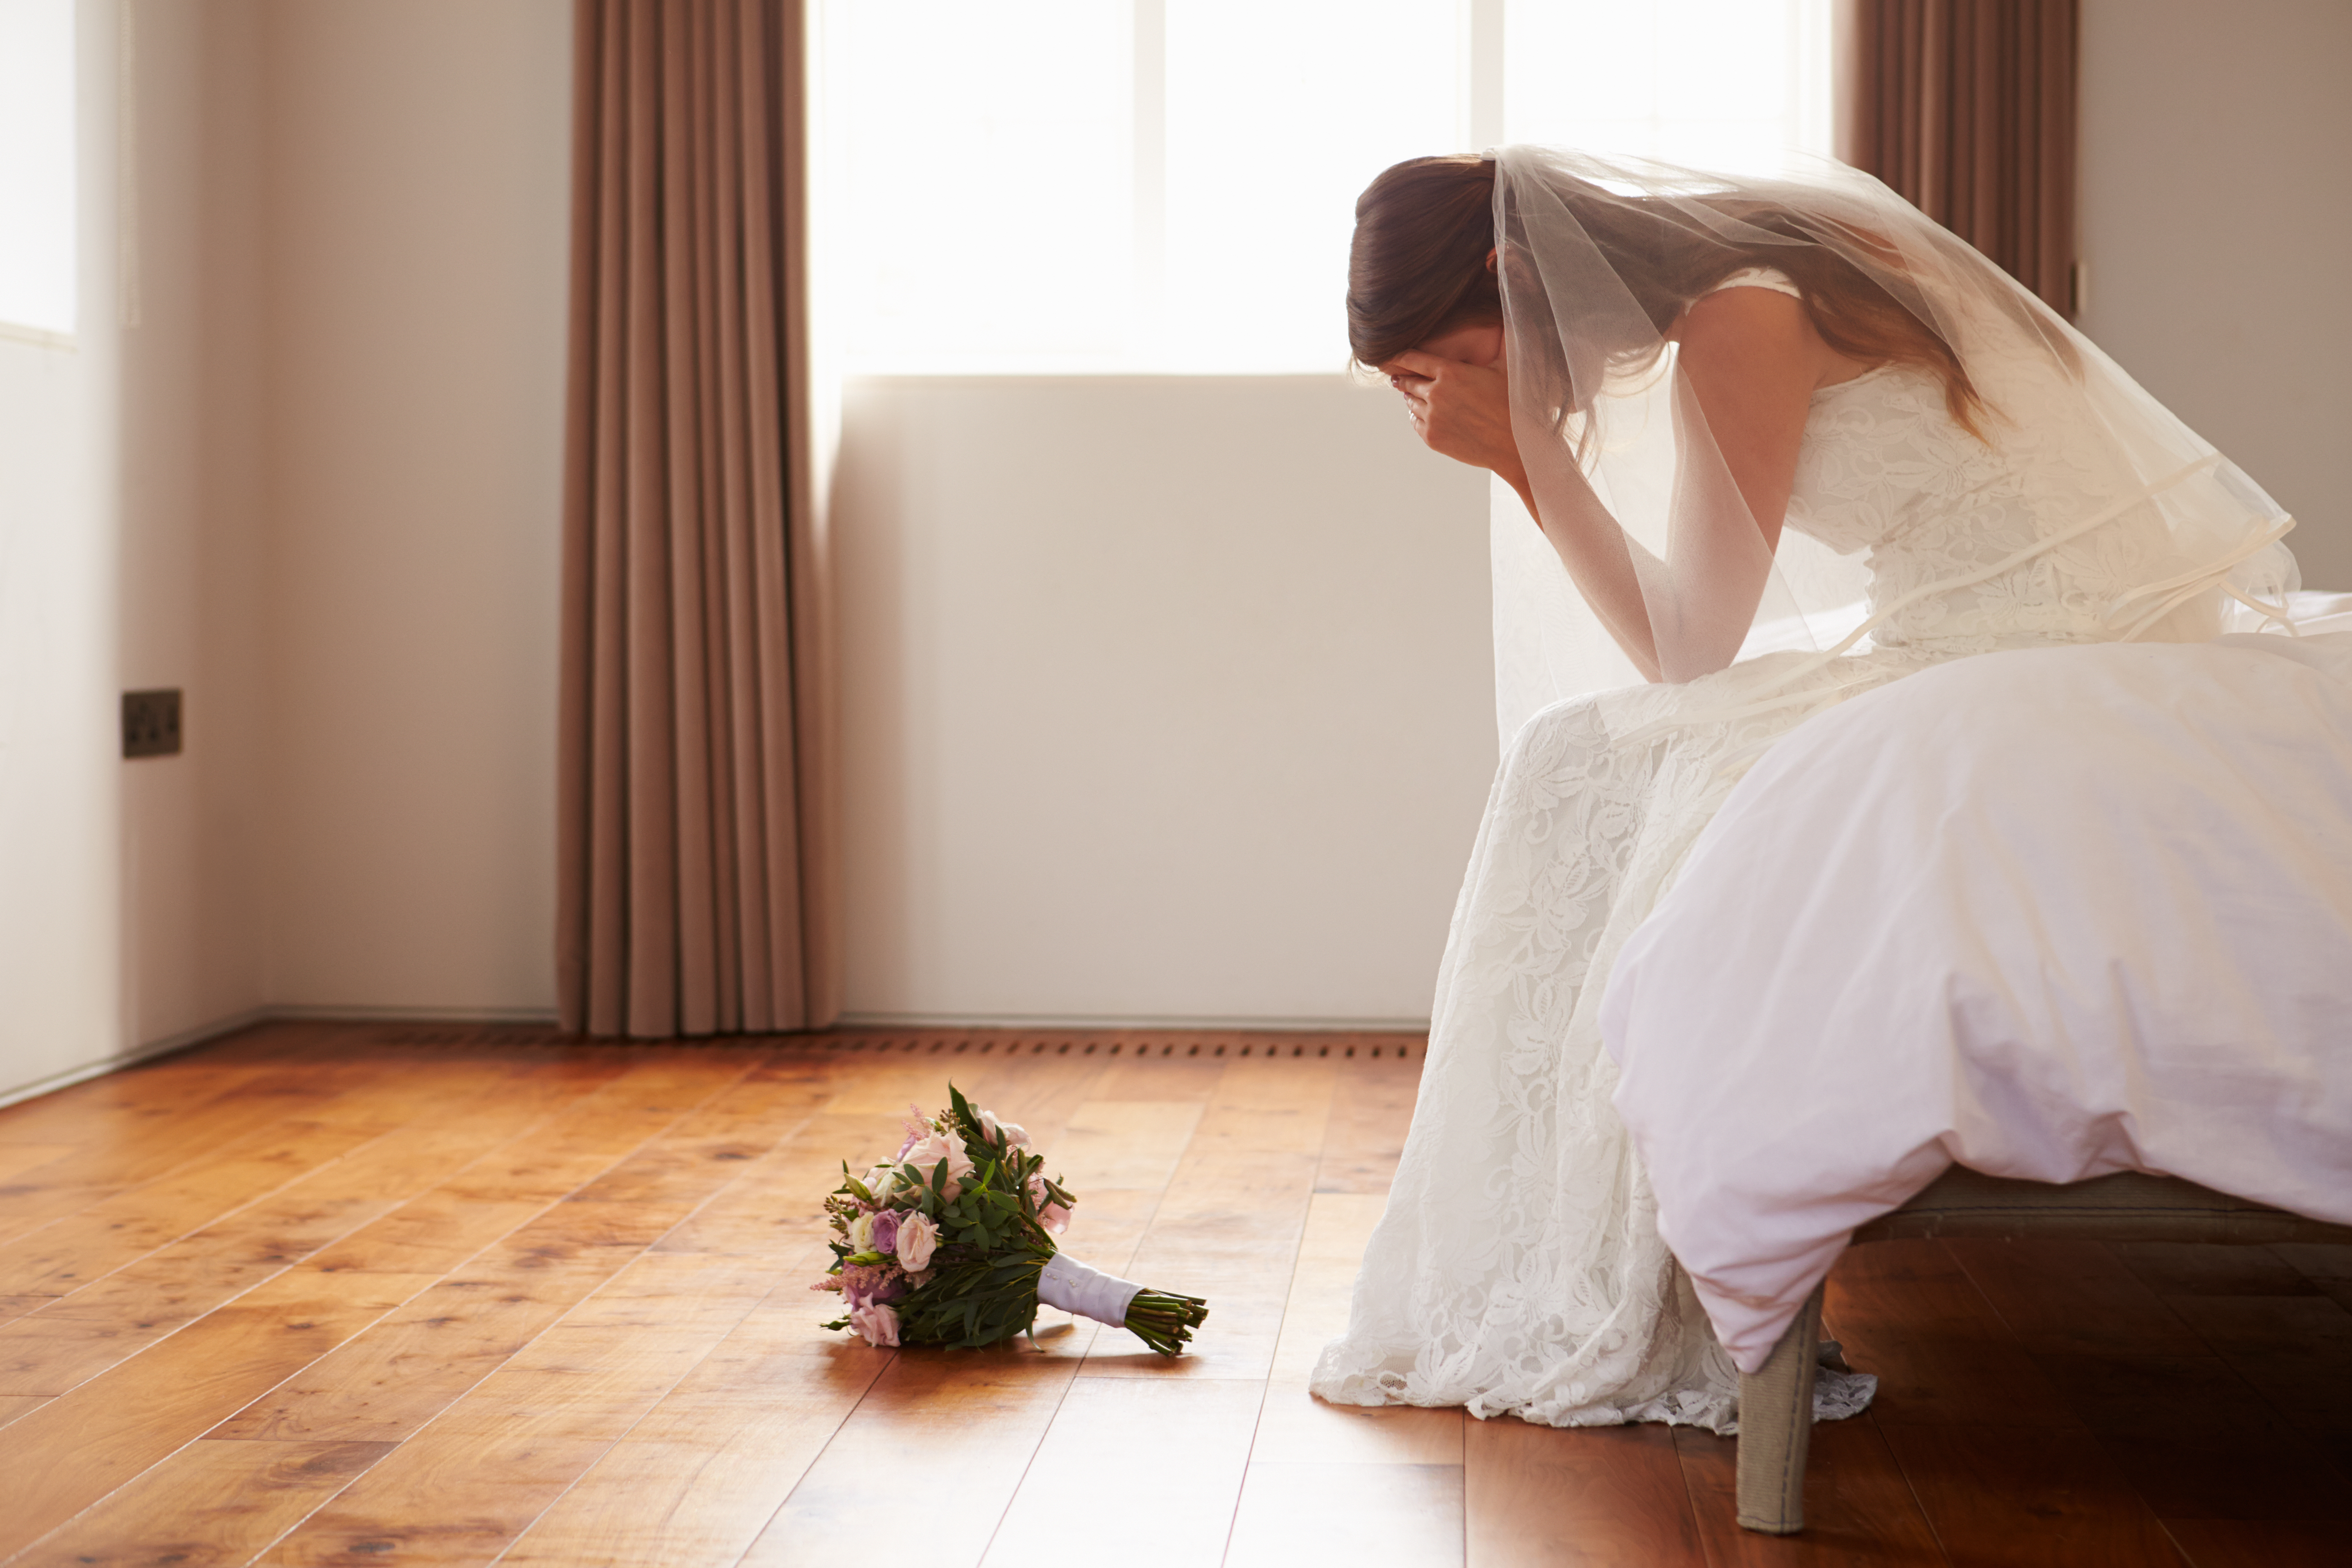 The bride is crying | Source: Getty Images